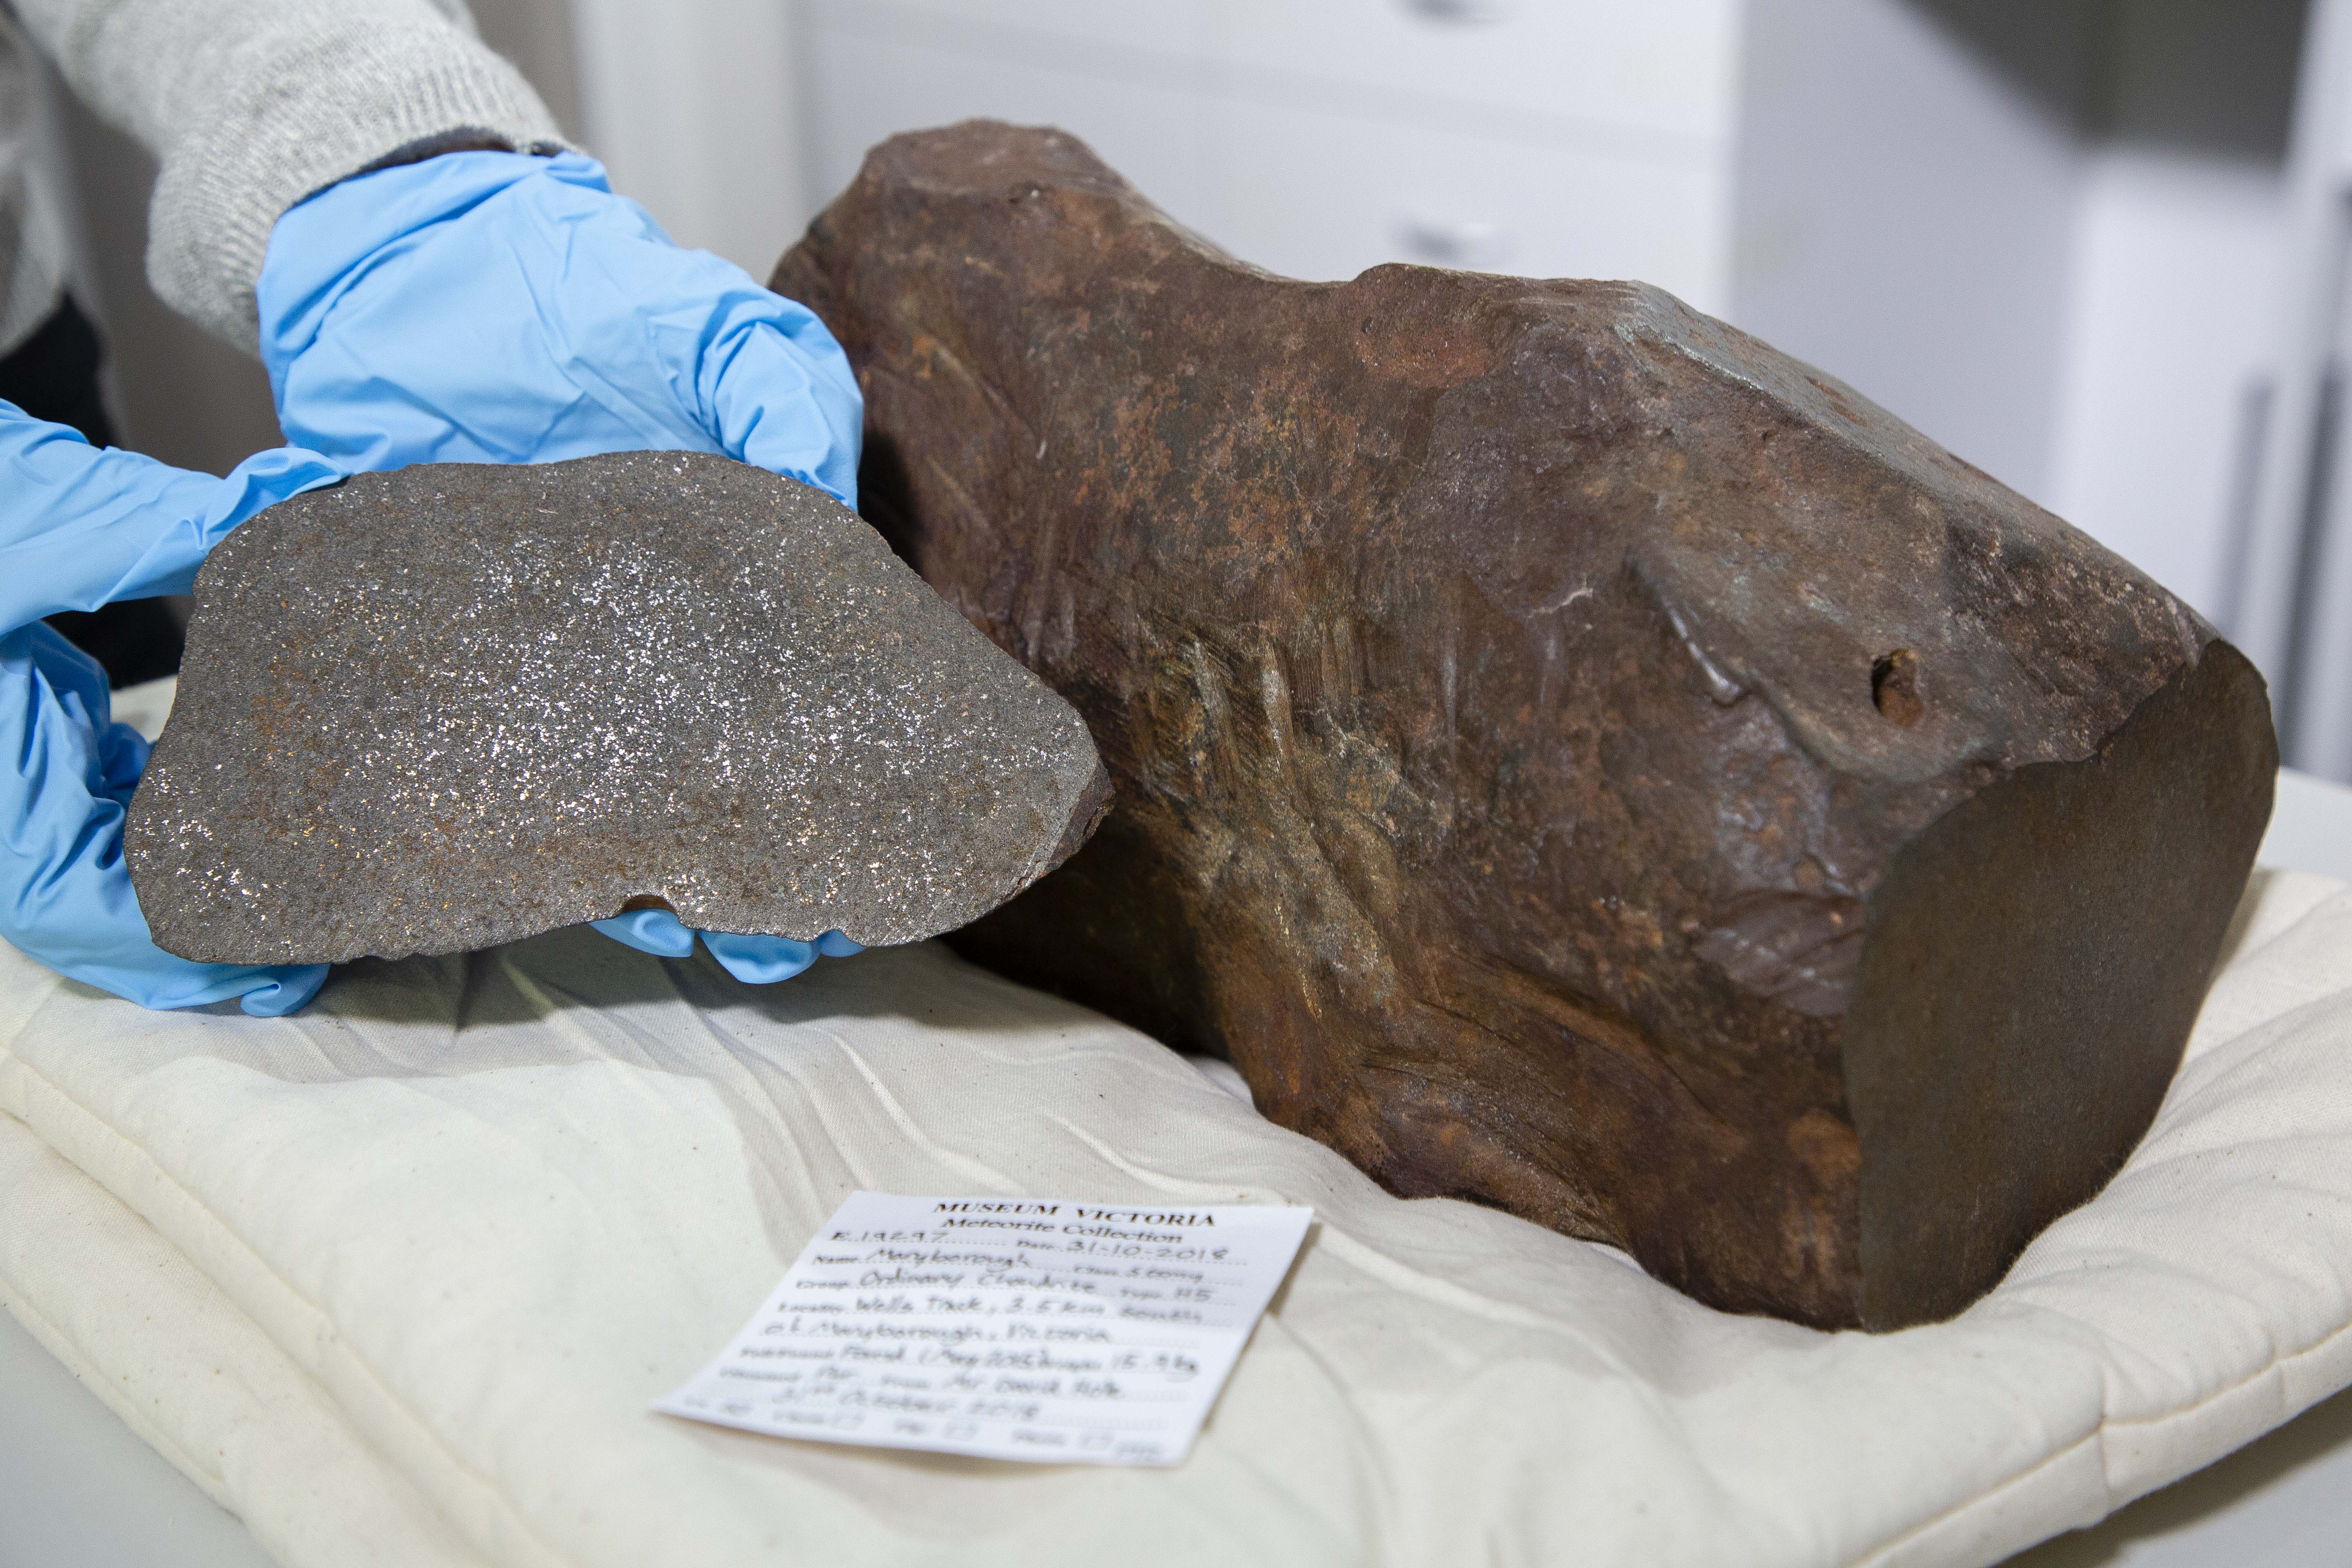 Meteorite Found By Gold Prospector The First Found In Victoria Since 1995 Comes To Museums Victoria Museums Victoria